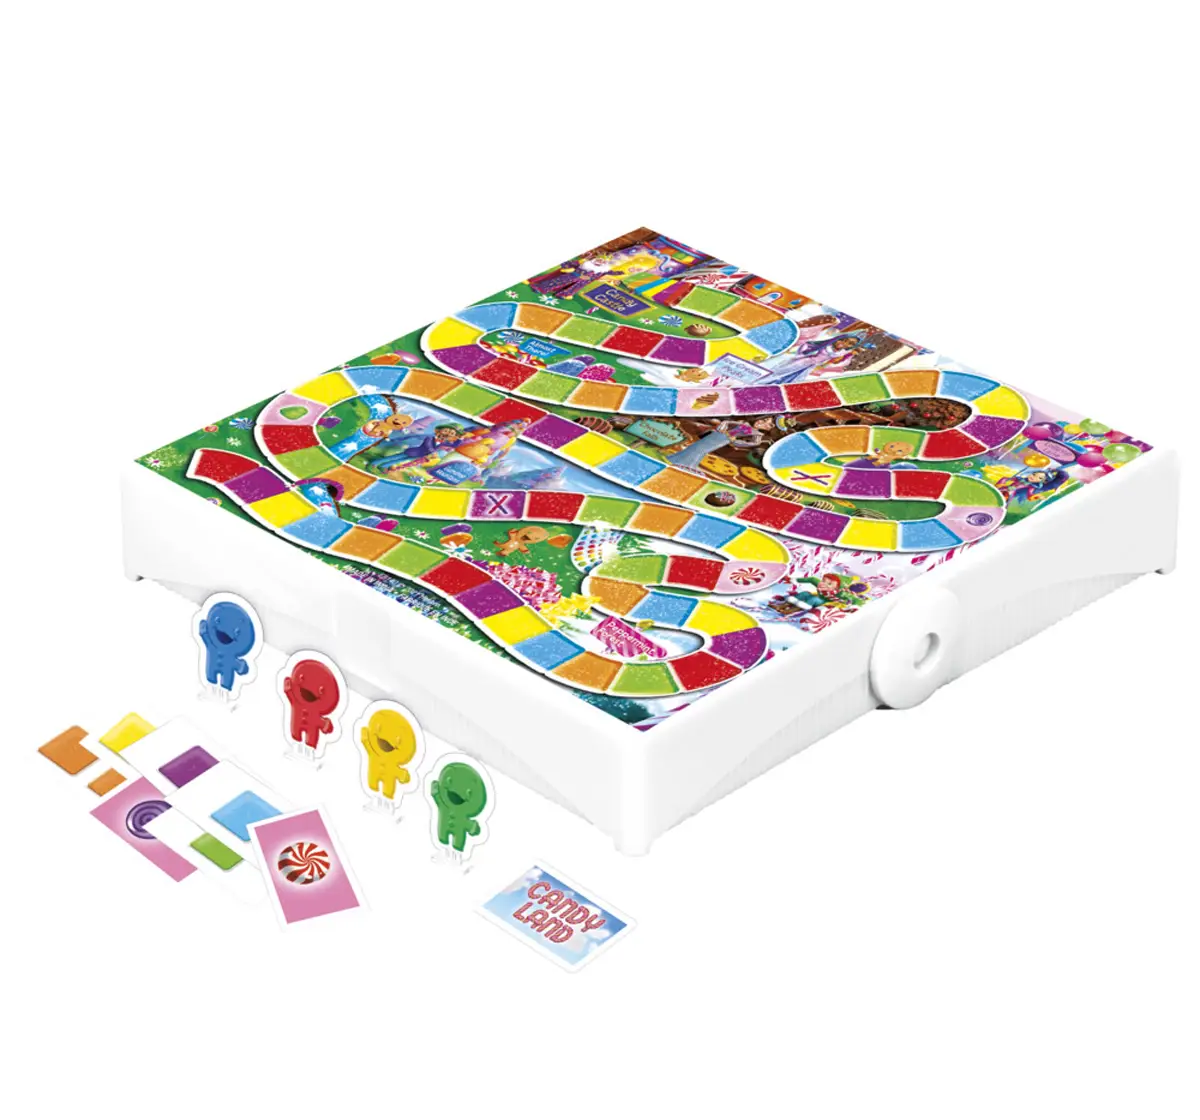 Hasbro Gaming Candy Land Grab and Go Portable Game, 2-4 Players Travel Game, 3Y+